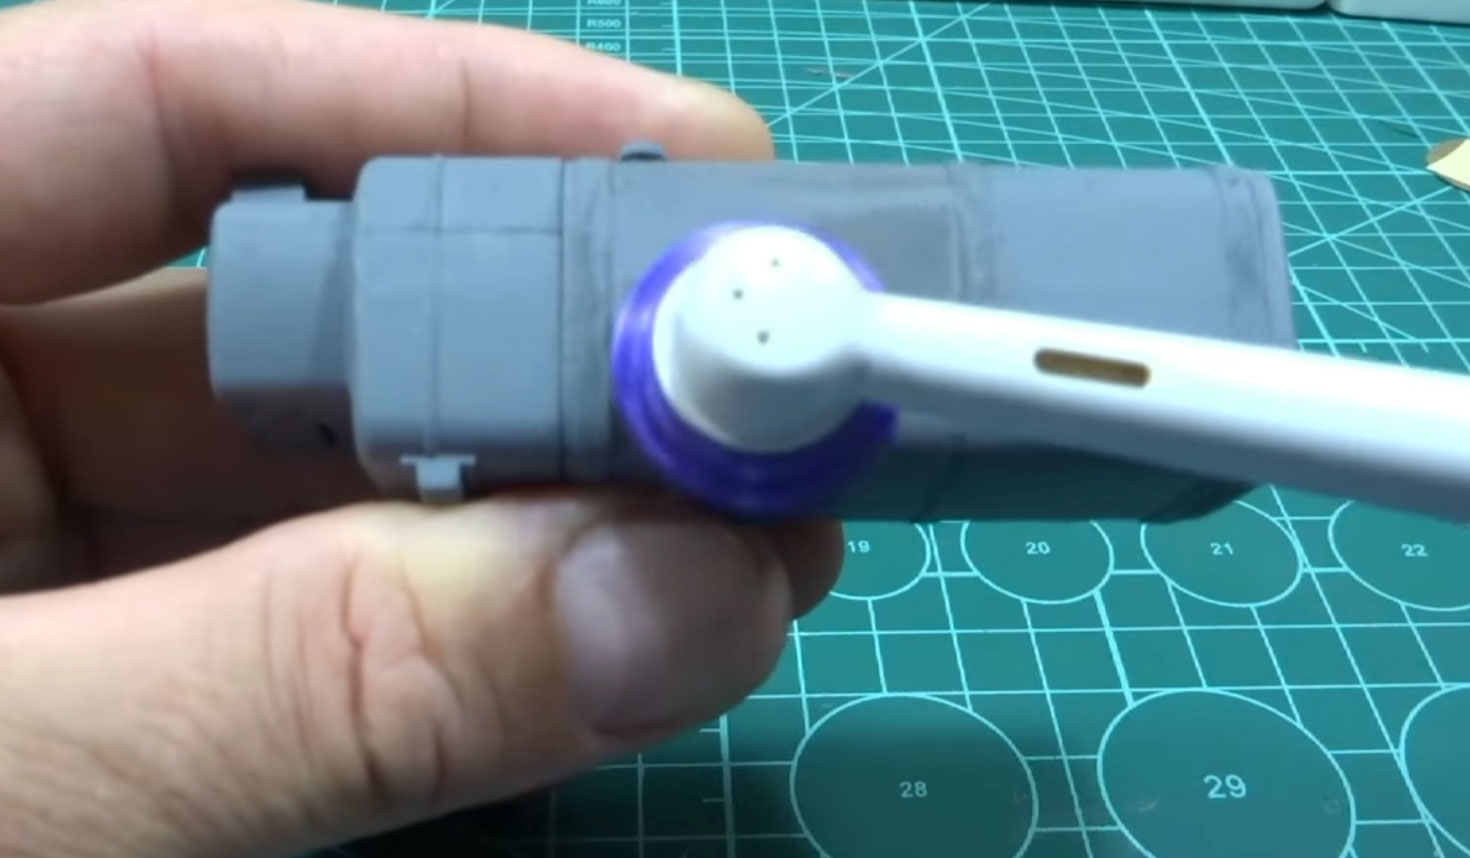 YouTuber rebuilds an electric toothbrush into a miniature grinder using 3D printing technology